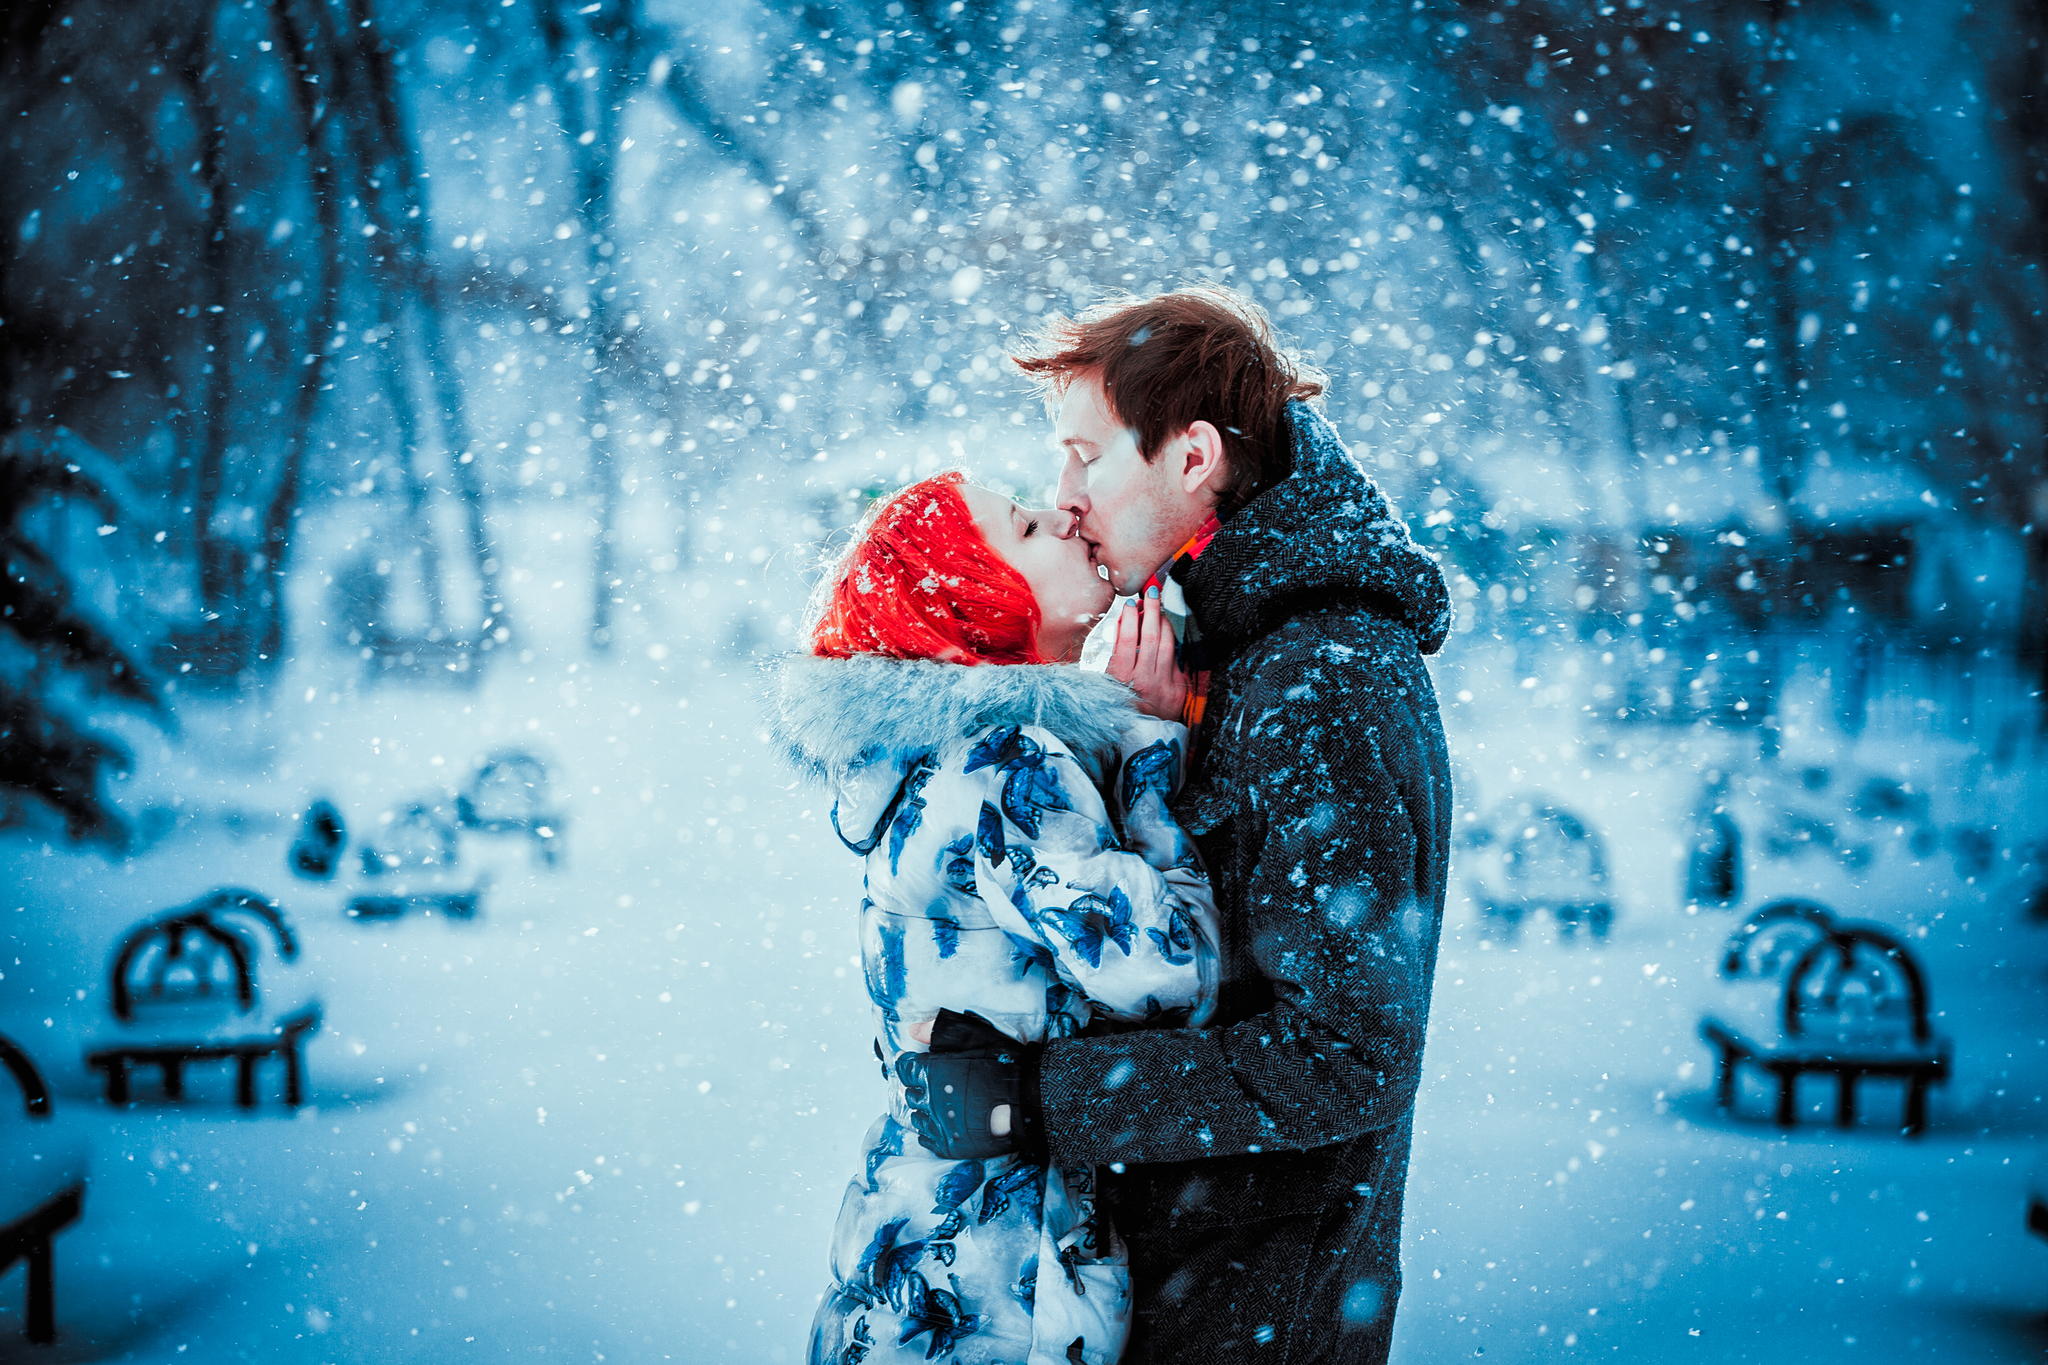 Happy Kiss Day - Fresh HD Wallpapers and Romantic Gifts ...